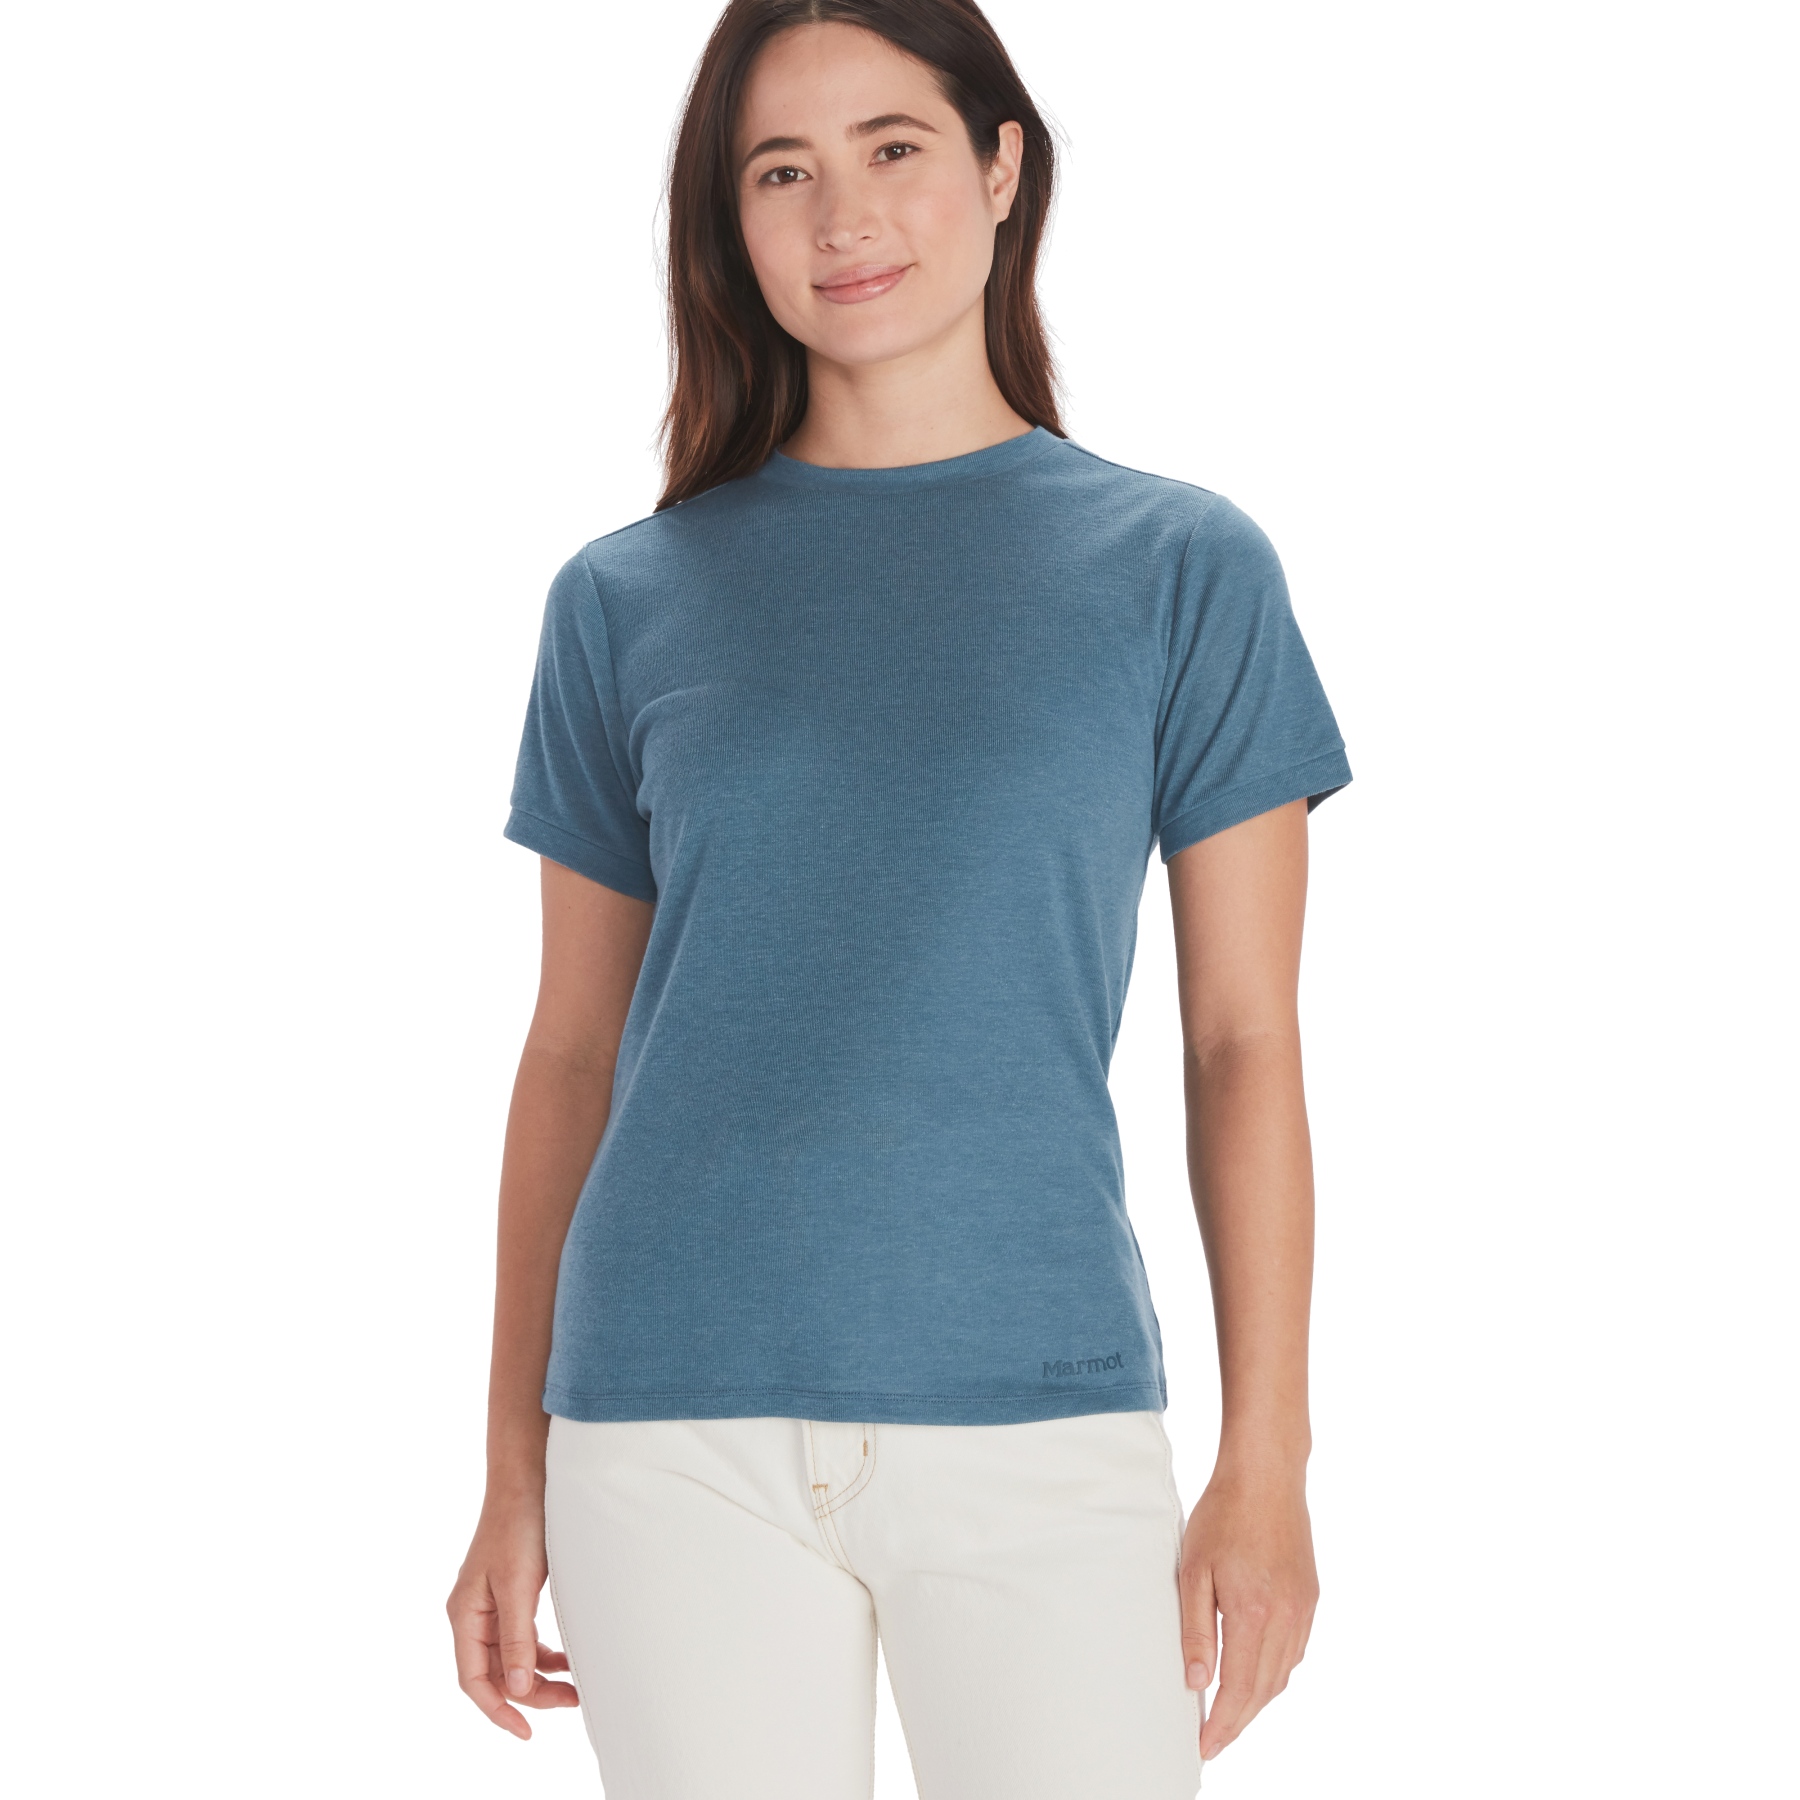 Picture of Marmot Switchback Short Sleeve Shirt Women - dusty teal